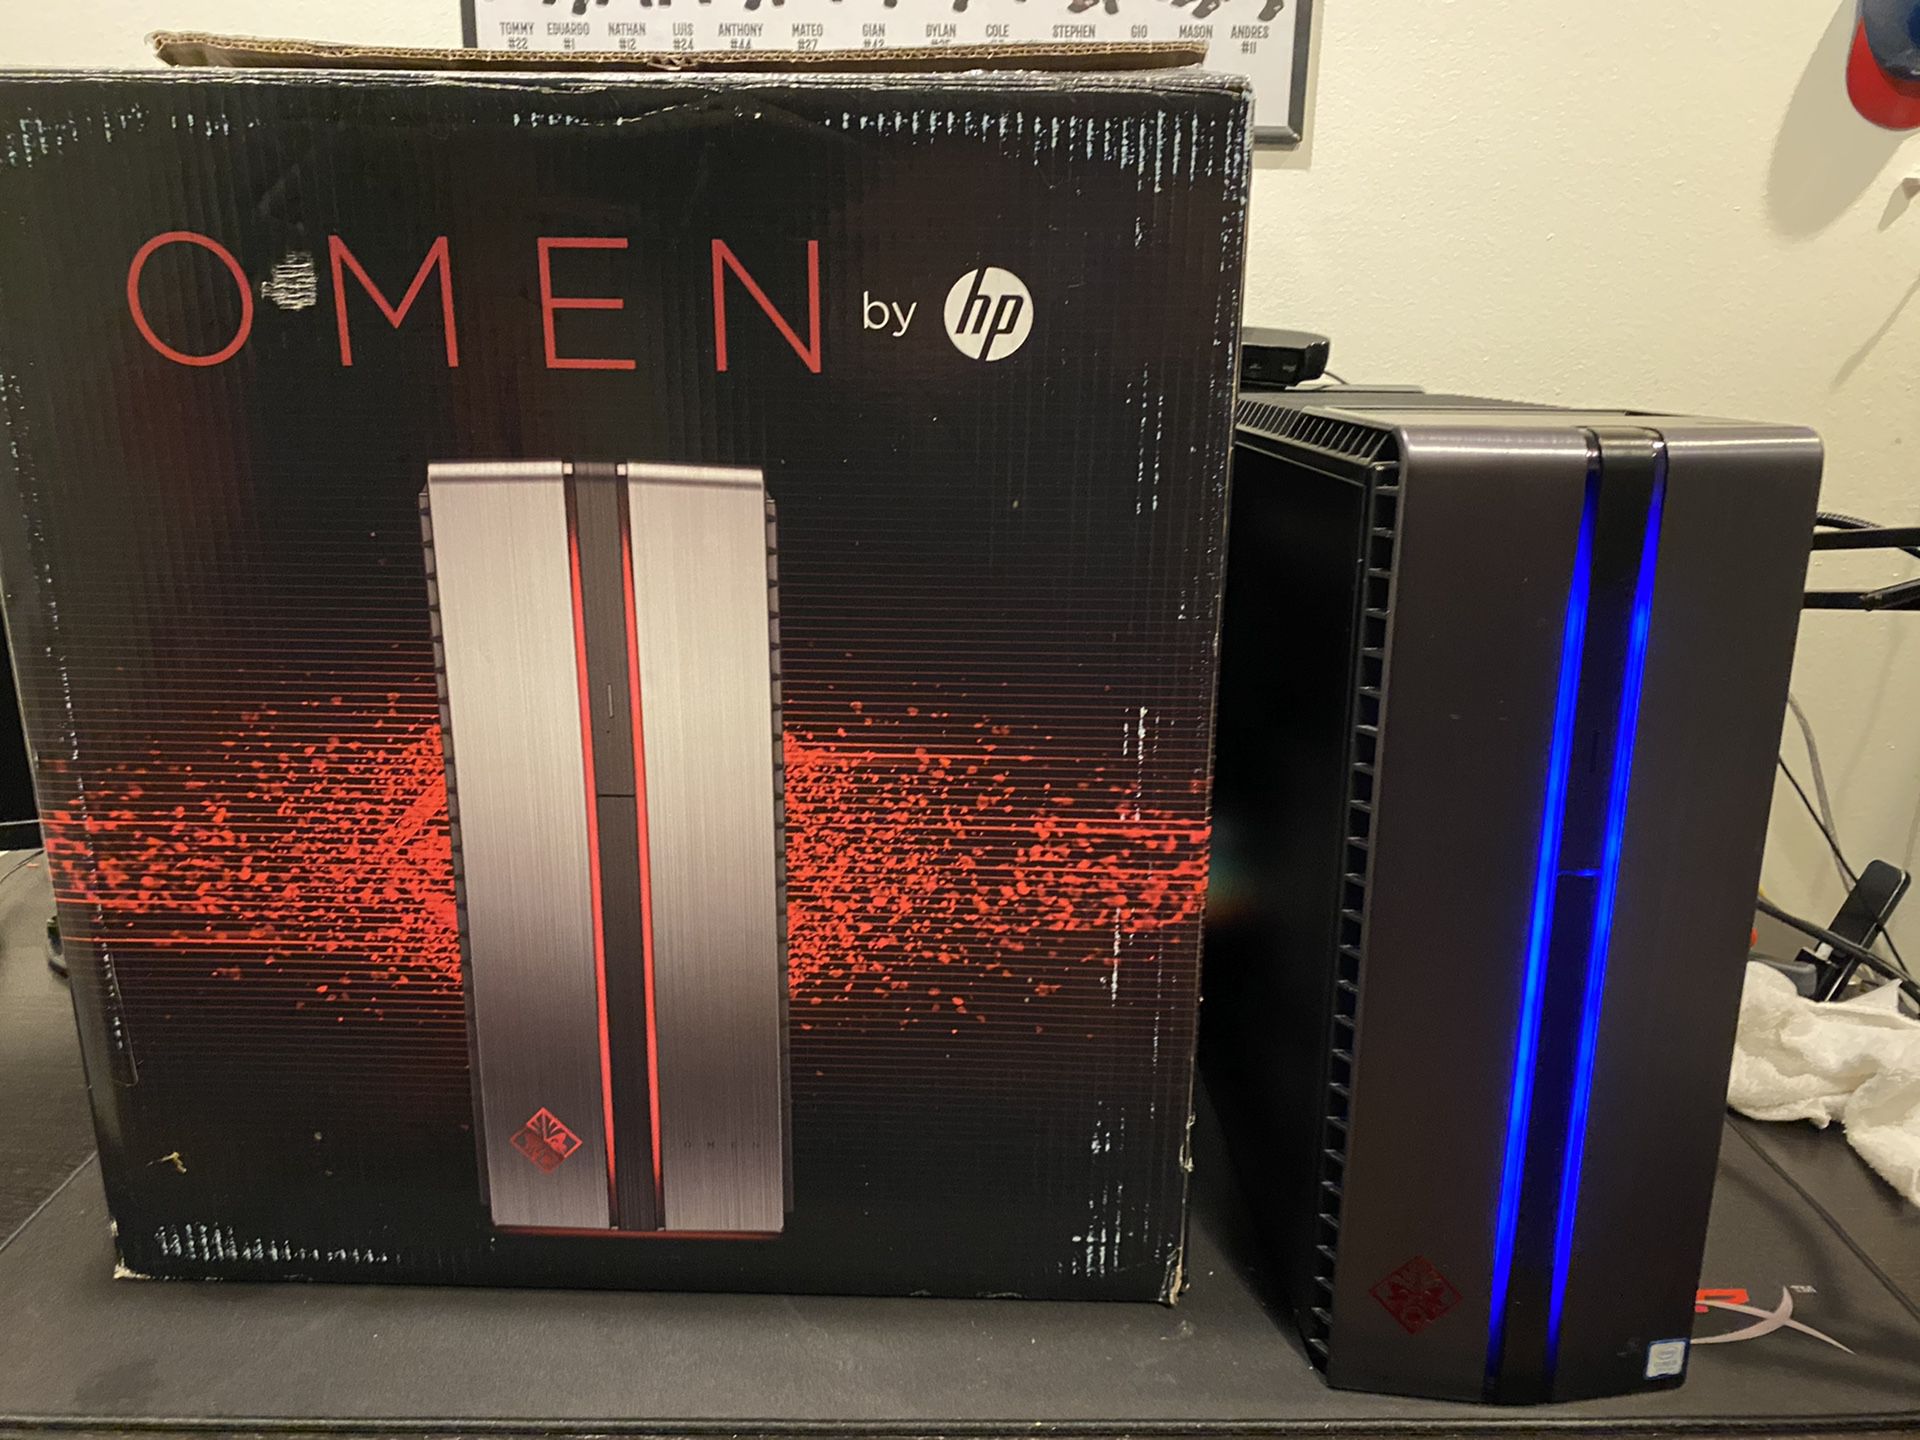 Gaming PC HP - OMEN by HP Desktop - Intel Core i5 - 8GB Memory - NVIDIA GeForce GTX 1060 - 1TB Hard Drive - Brushed Aluminum (200+fps on all games)